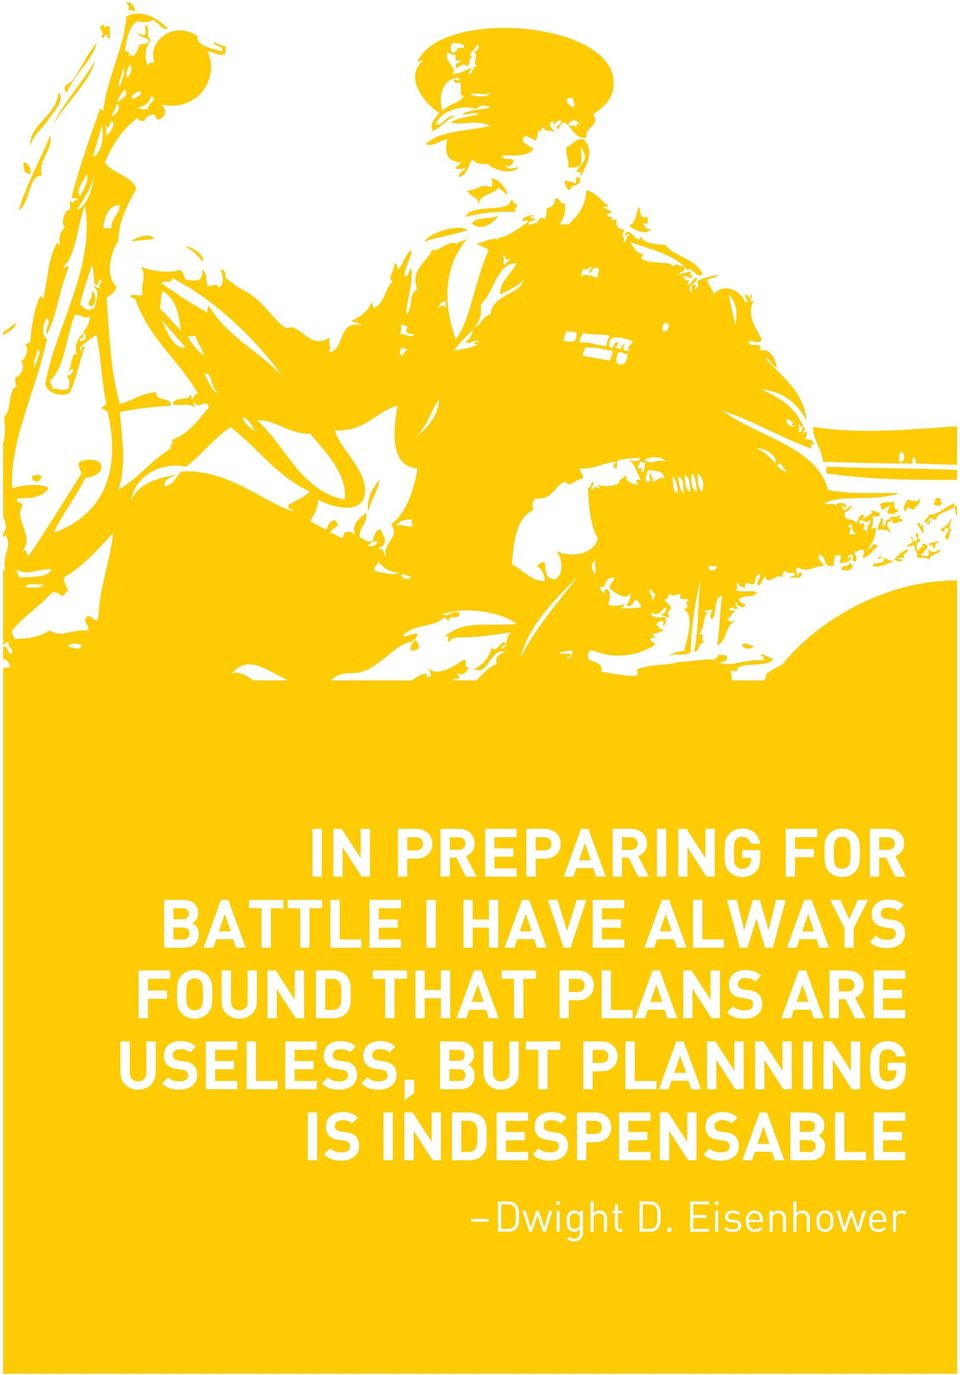 ARE USELESS, BUT PLANNING IS